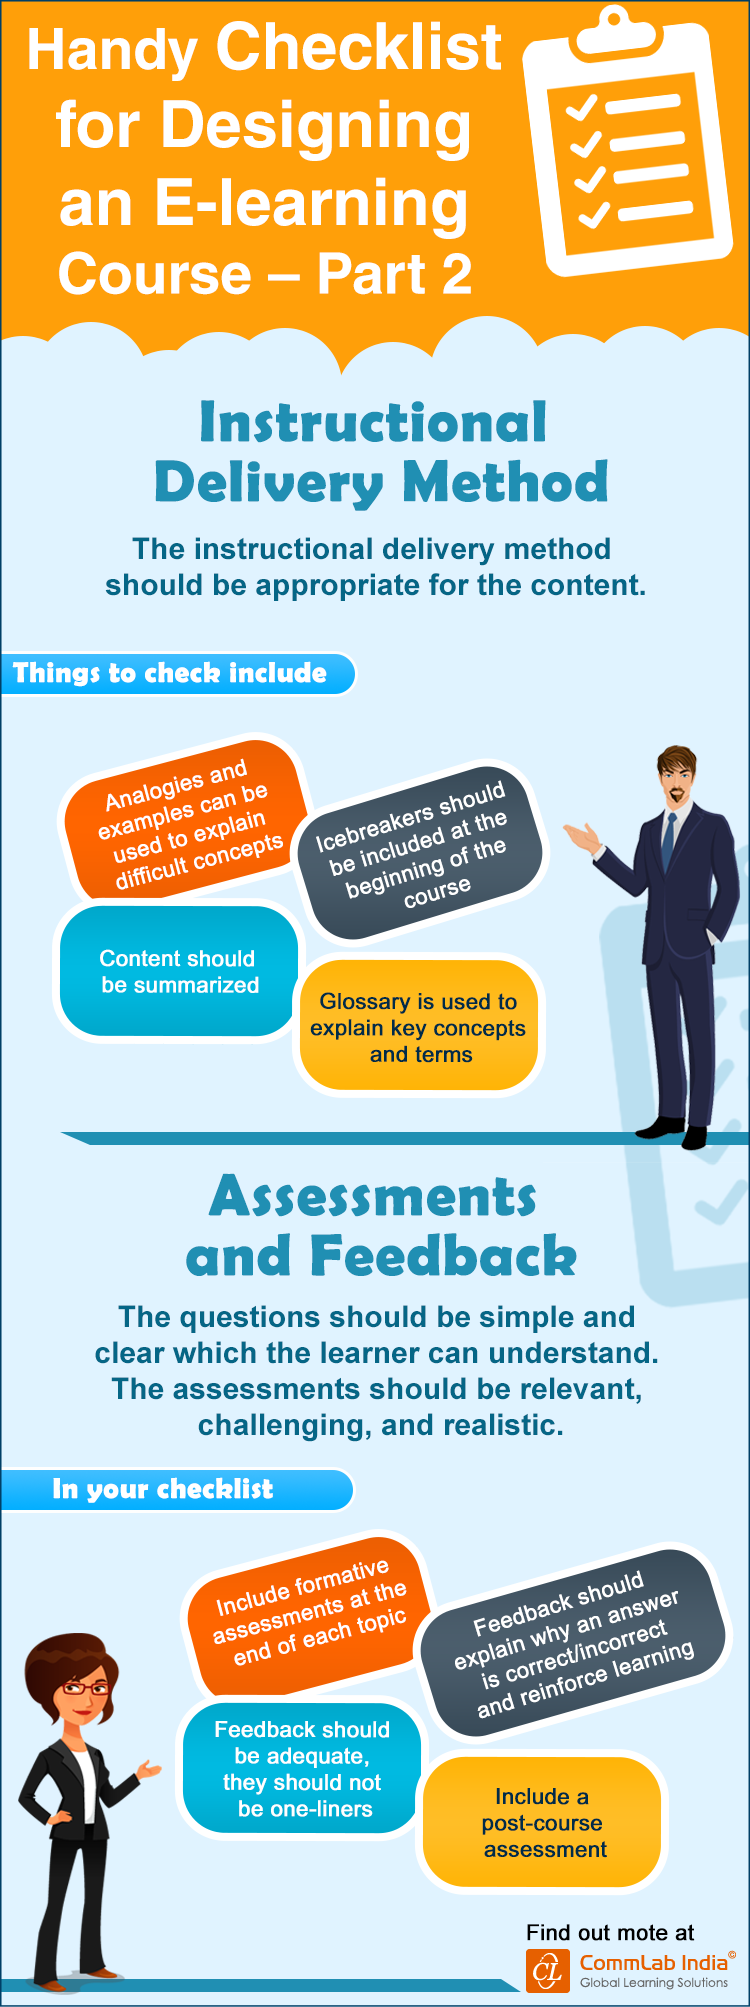 A Handy Checklist for Designing an E-learning Course - Part 2 [Infographic]